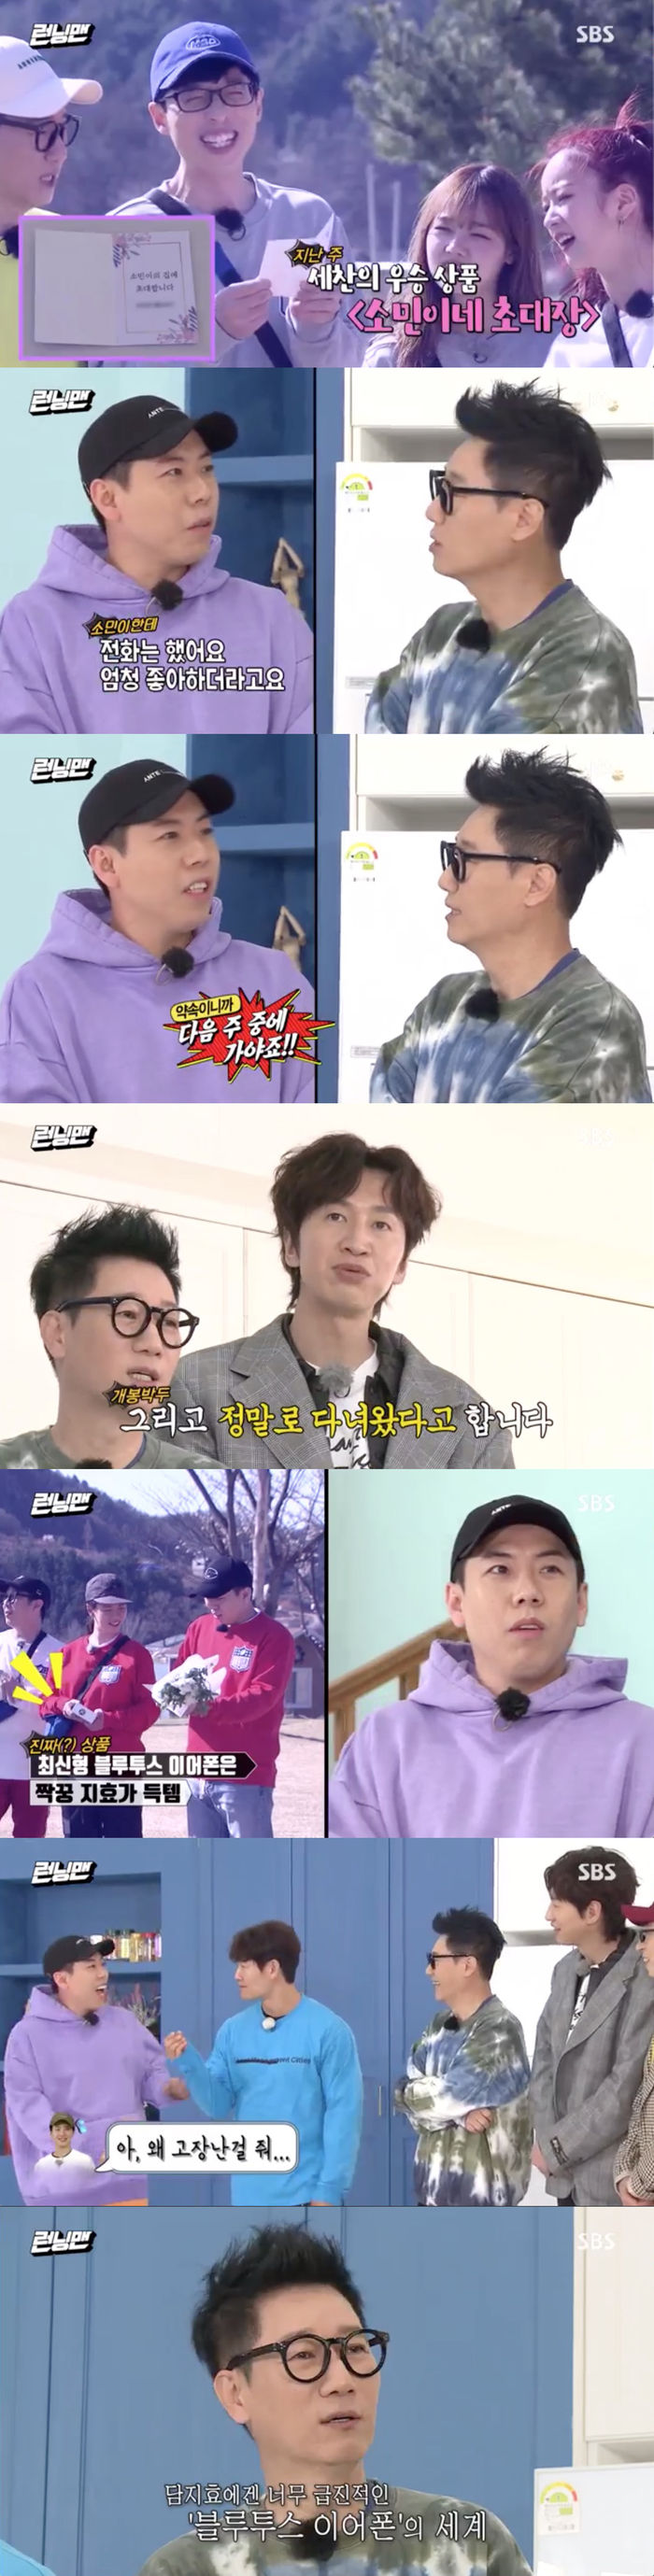 Yang Se-chan heralded a visit to the Jeon So-min homeOn SBS Running Man broadcasted on the 3rd, Yang Se-chan, who received a special prize last week, released the behind-the-scenes story.On the day of the broadcast, Running Man asked Yang Se-chan, Have you been to Somin?Yang Se-chan won last week and received the entrance secret number as a gift with Somin Invitation.Yang Se-chan said, I havent gone yet, I called, and attracted Eye-catching, who also said, I called and I liked it very much.When asked when he plans to go, Yang Se-chan said, I am going to go next week. At this time, the production team said, And I really went.The caption Opening Bakdu was inserted to raise expectations.Ji Suk-jin said, It was a penalty, not a product, and Yang Se-chan said, Because I did. AirPod was taken by Ji Hyo sister.Then Kim Jong Kook said, Why did you take it and give me a broken one? And Haha laughed, saying, I would not have had a ship.Ji Suk-jin said, I will not be able to connect with Bluetooth. He attracted Eye-catching by referring to Song Ji-hyo, who is building the era and walls.